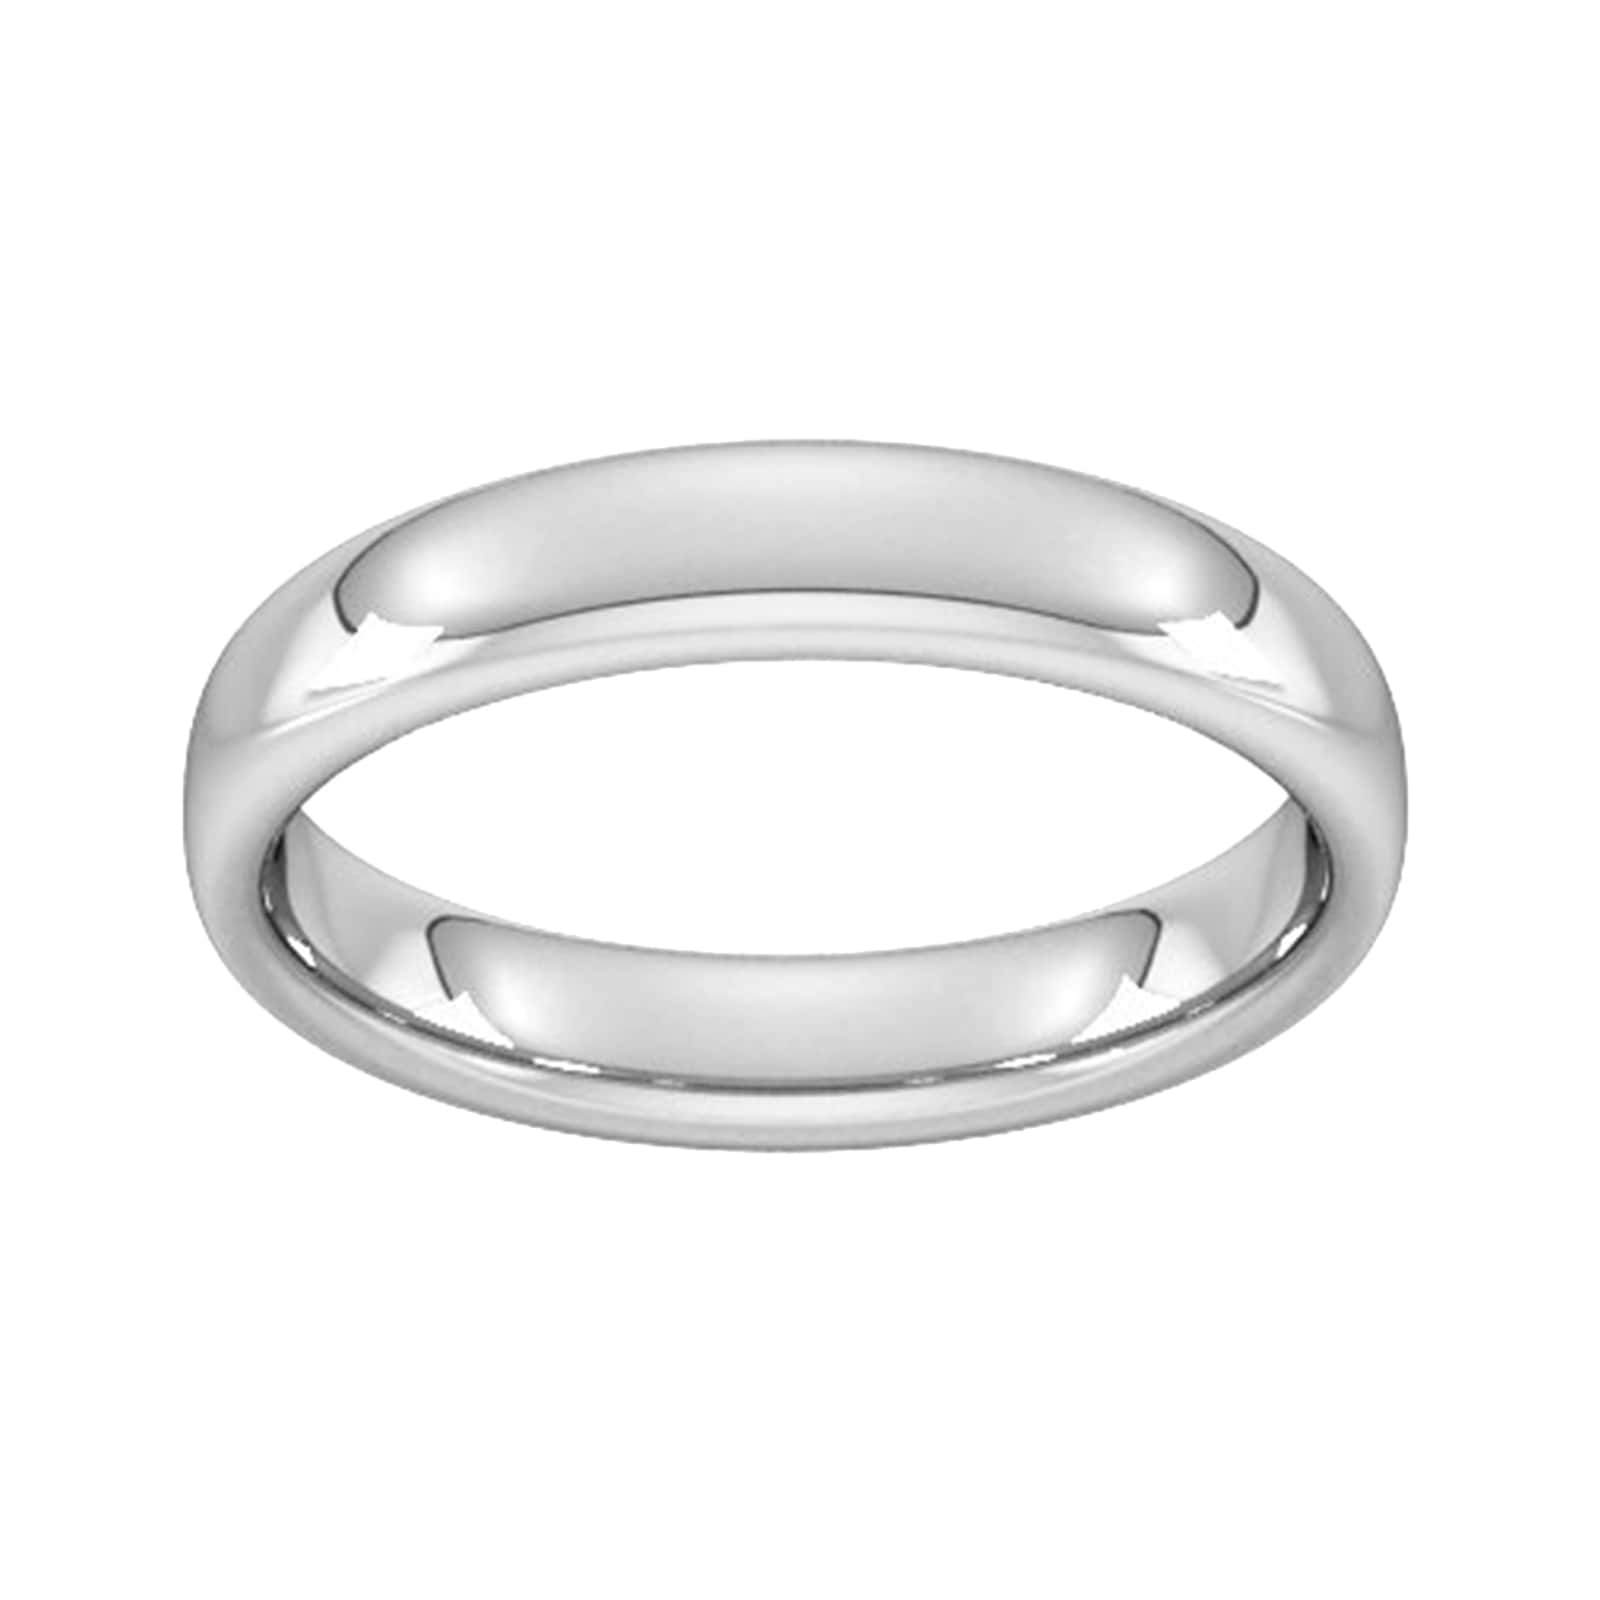 4mm Slight Court Heavy Wedding Ring In Sterling Silver - Ring Size Q